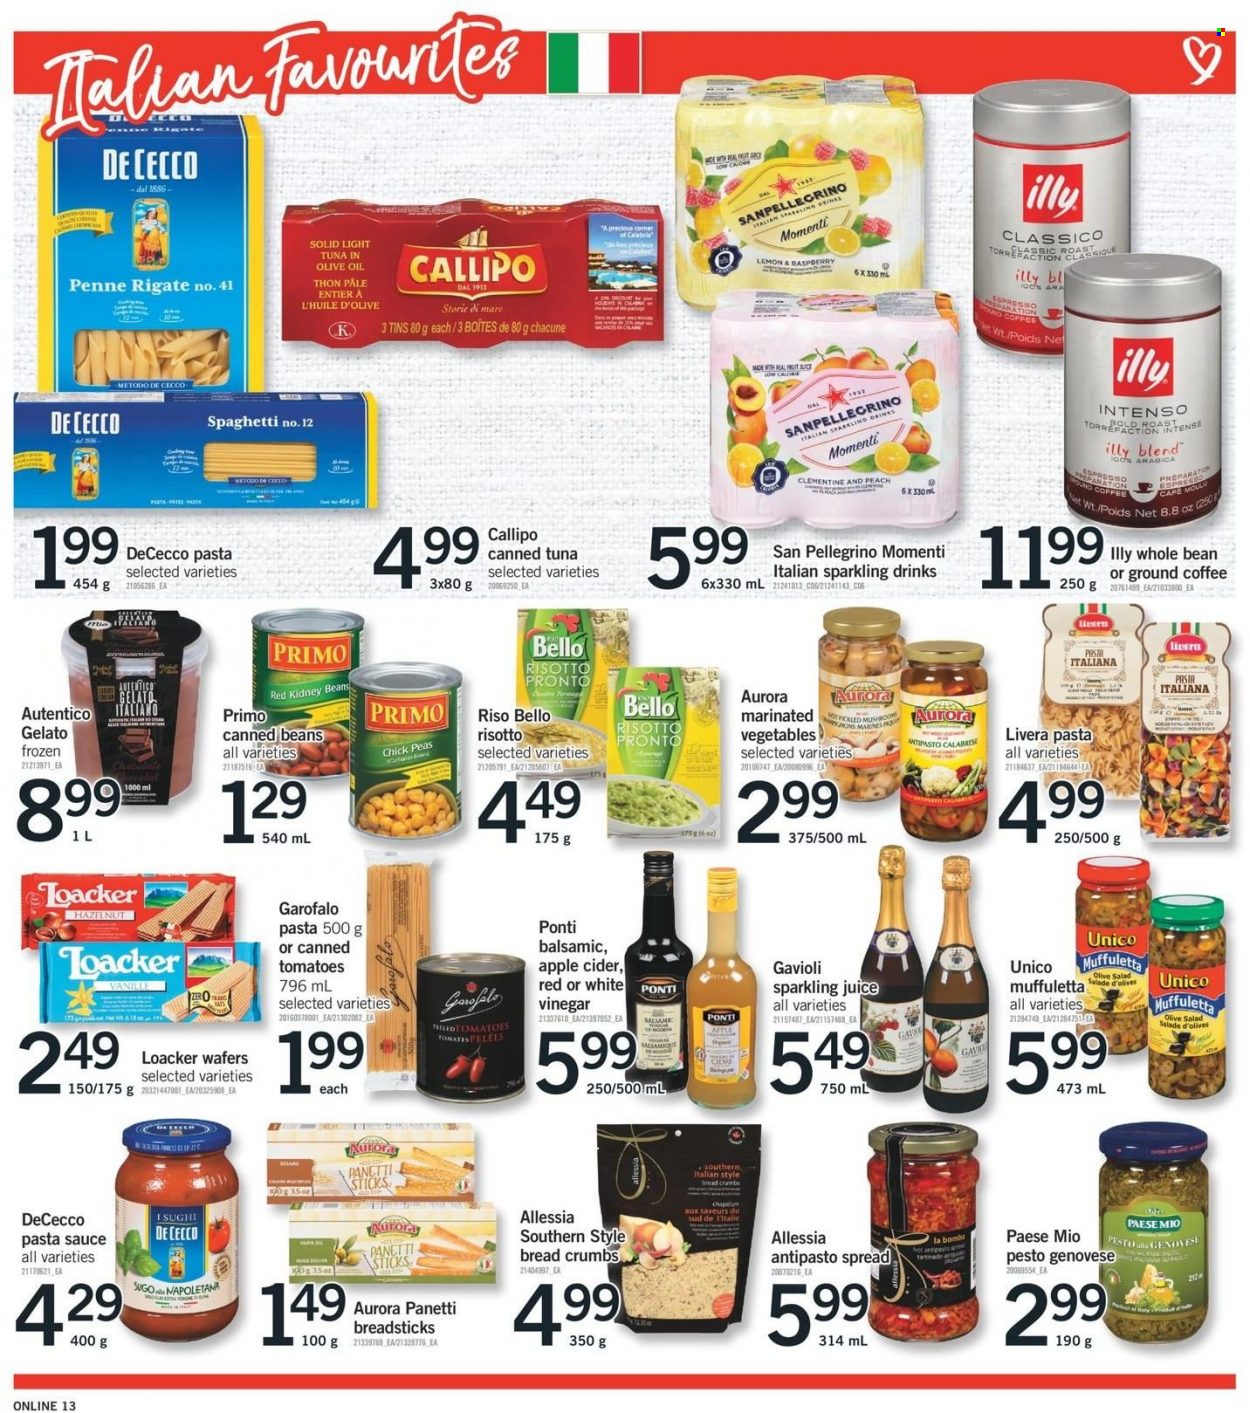 thumbnail - Fortinos Flyer - November 11, 2021 - November 17, 2021 - Sales products - Ace, breadcrumbs, tomatoes, peas, salad, tuna, risotto, spaghetti, pasta sauce, sauce, gelato, wafers, bread sticks, canned tuna, kidney beans, penne, Classico, vinegar, olive oil, oil, juice, sparkling juice, San Pellegrino, coffee, ground coffee, Intenso, Illy, apple cider, cider, pesto, olives. Page 12.